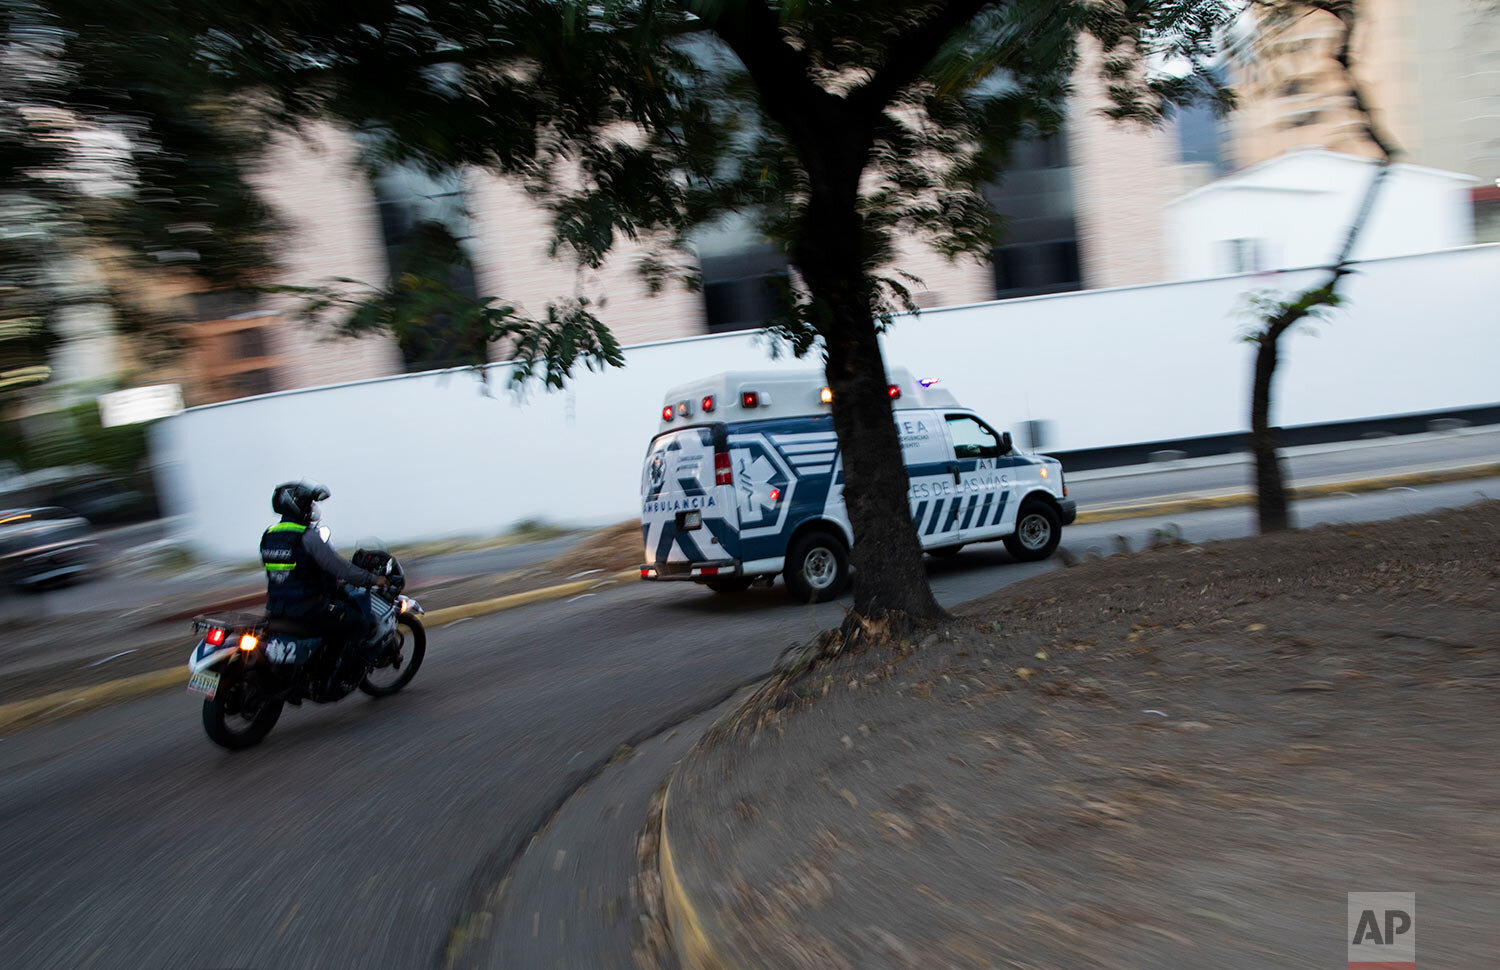  An Angels of the Road volunteer paramedic follows on a motorcycle their single ambulance transporting a patient who was injured in a road accident, in Caracas, Venezuela, Wednesday, Feb. 10, 2021. (AP Photo/Ariana Cubillos) 